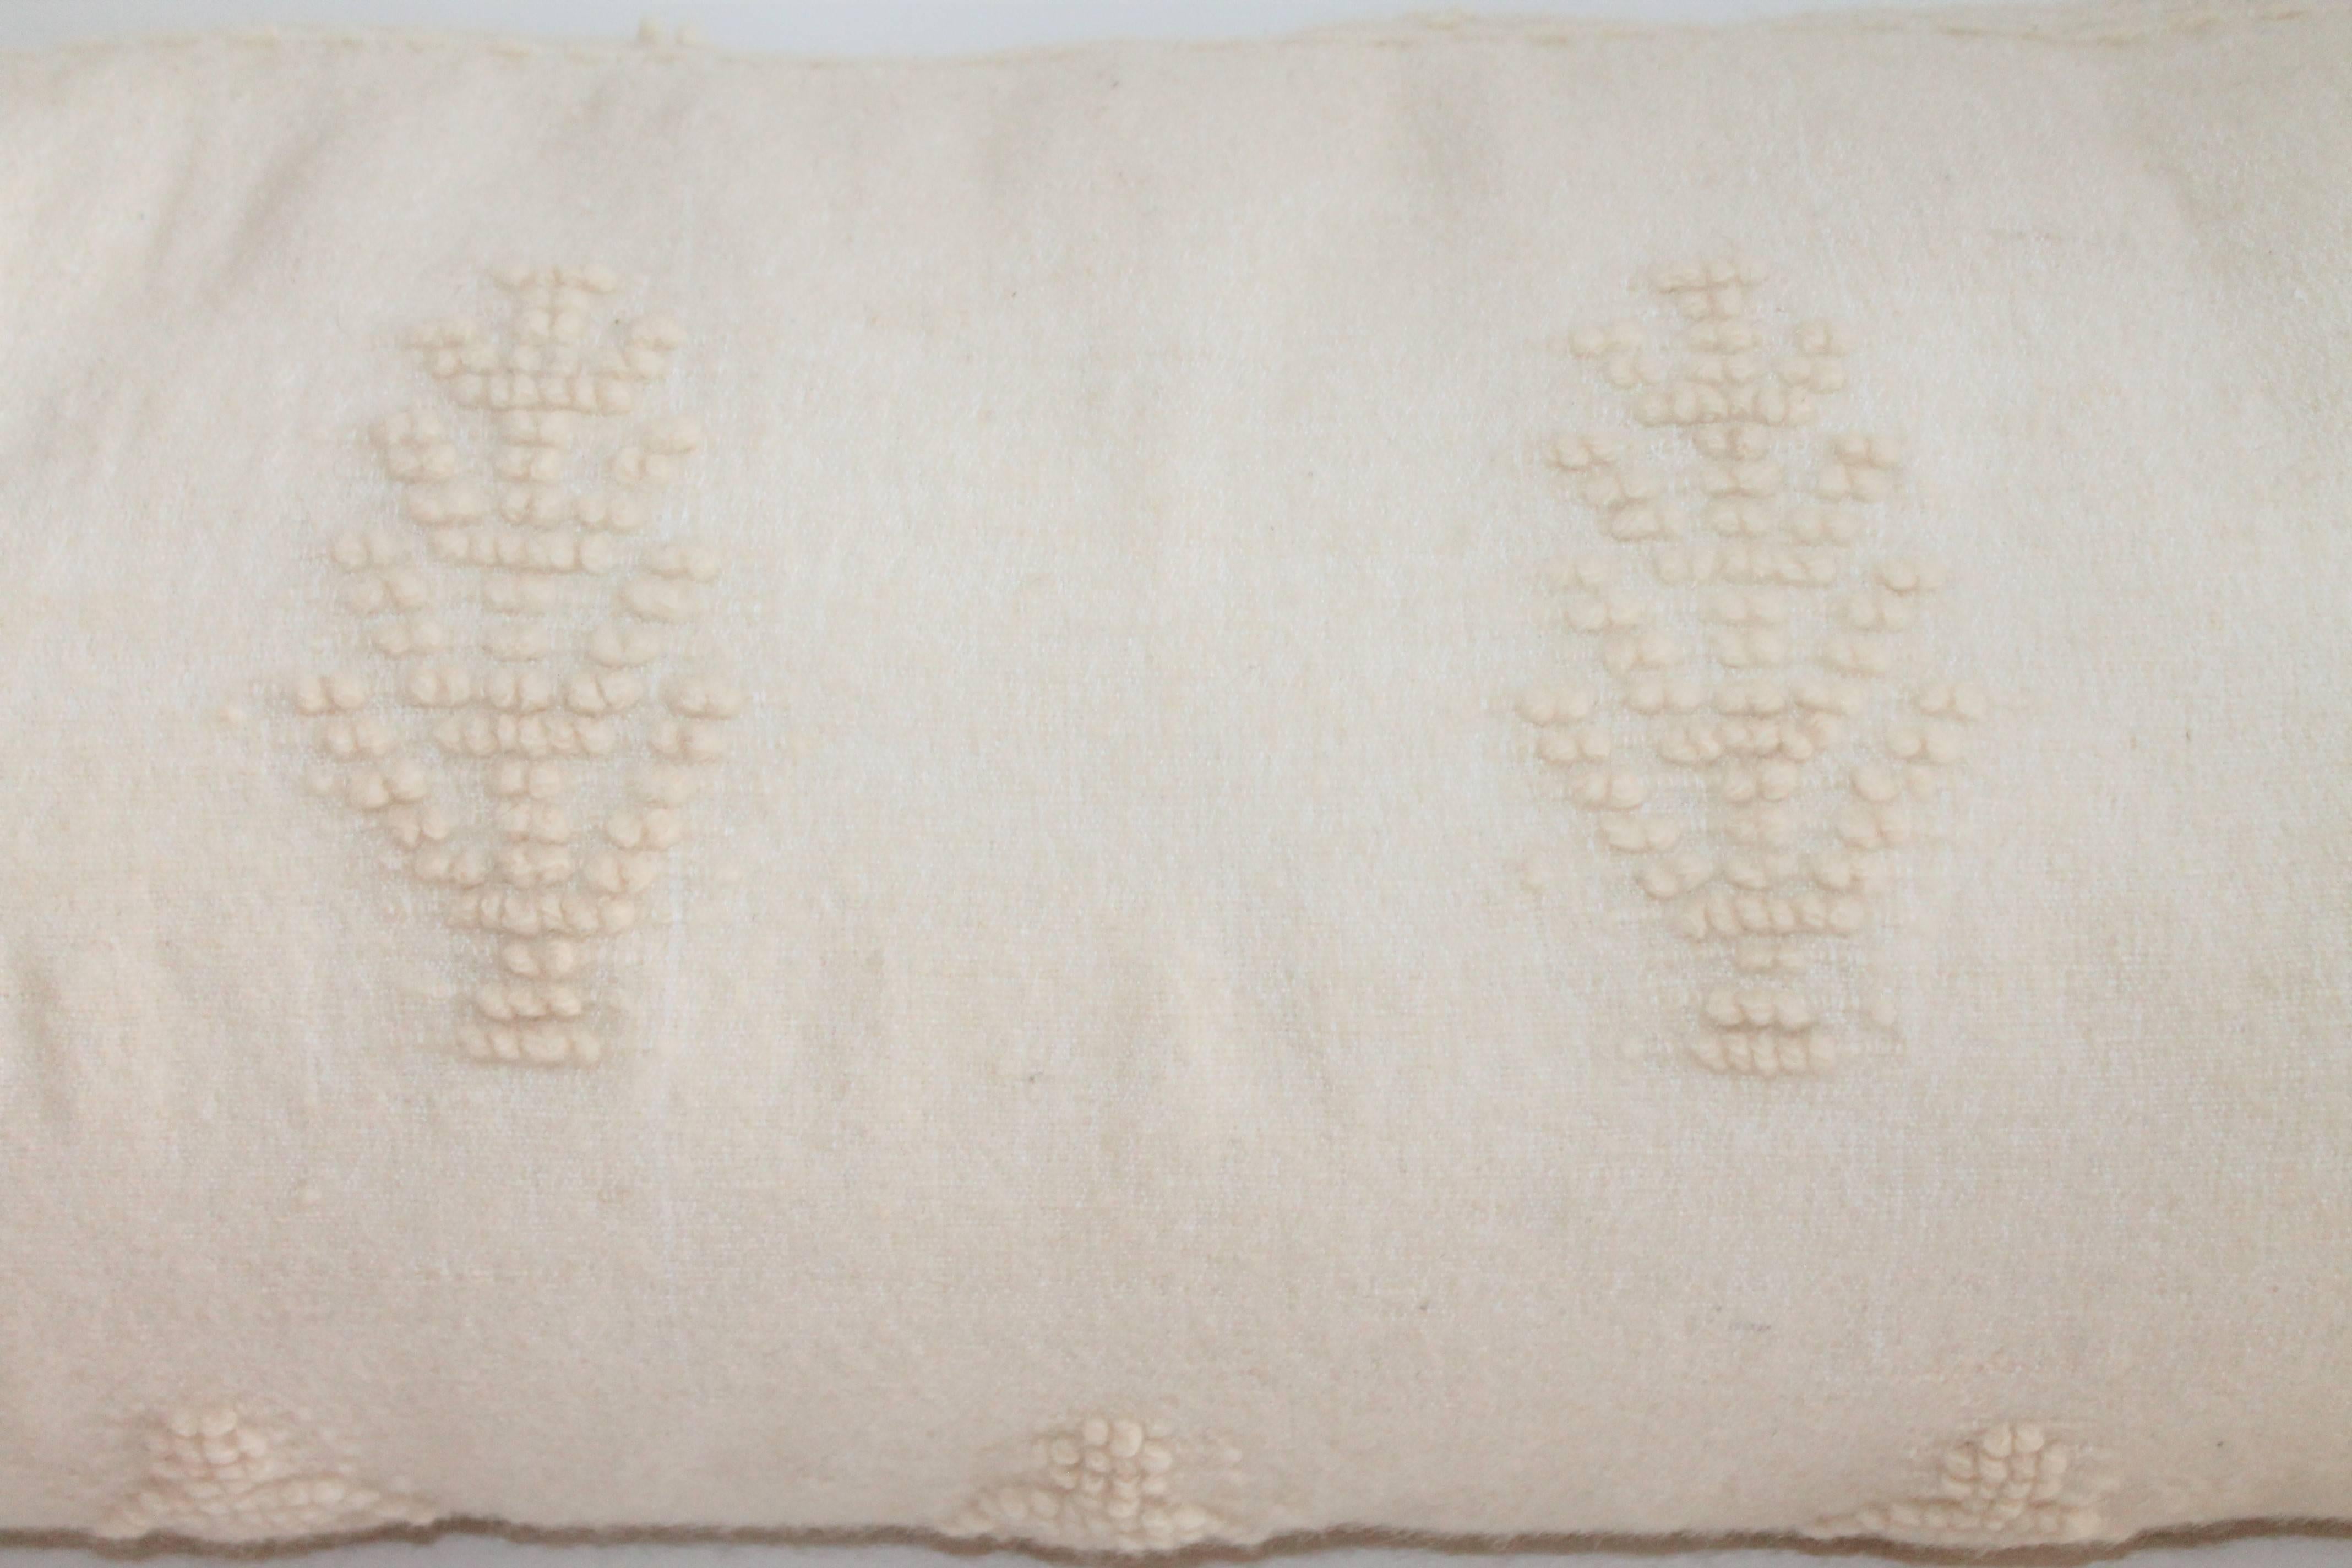 19th century Alpaca bolster wool pictorial pillow with little trees floating throughout. The backing is in a cream raw silk linen. Down and feather fill.